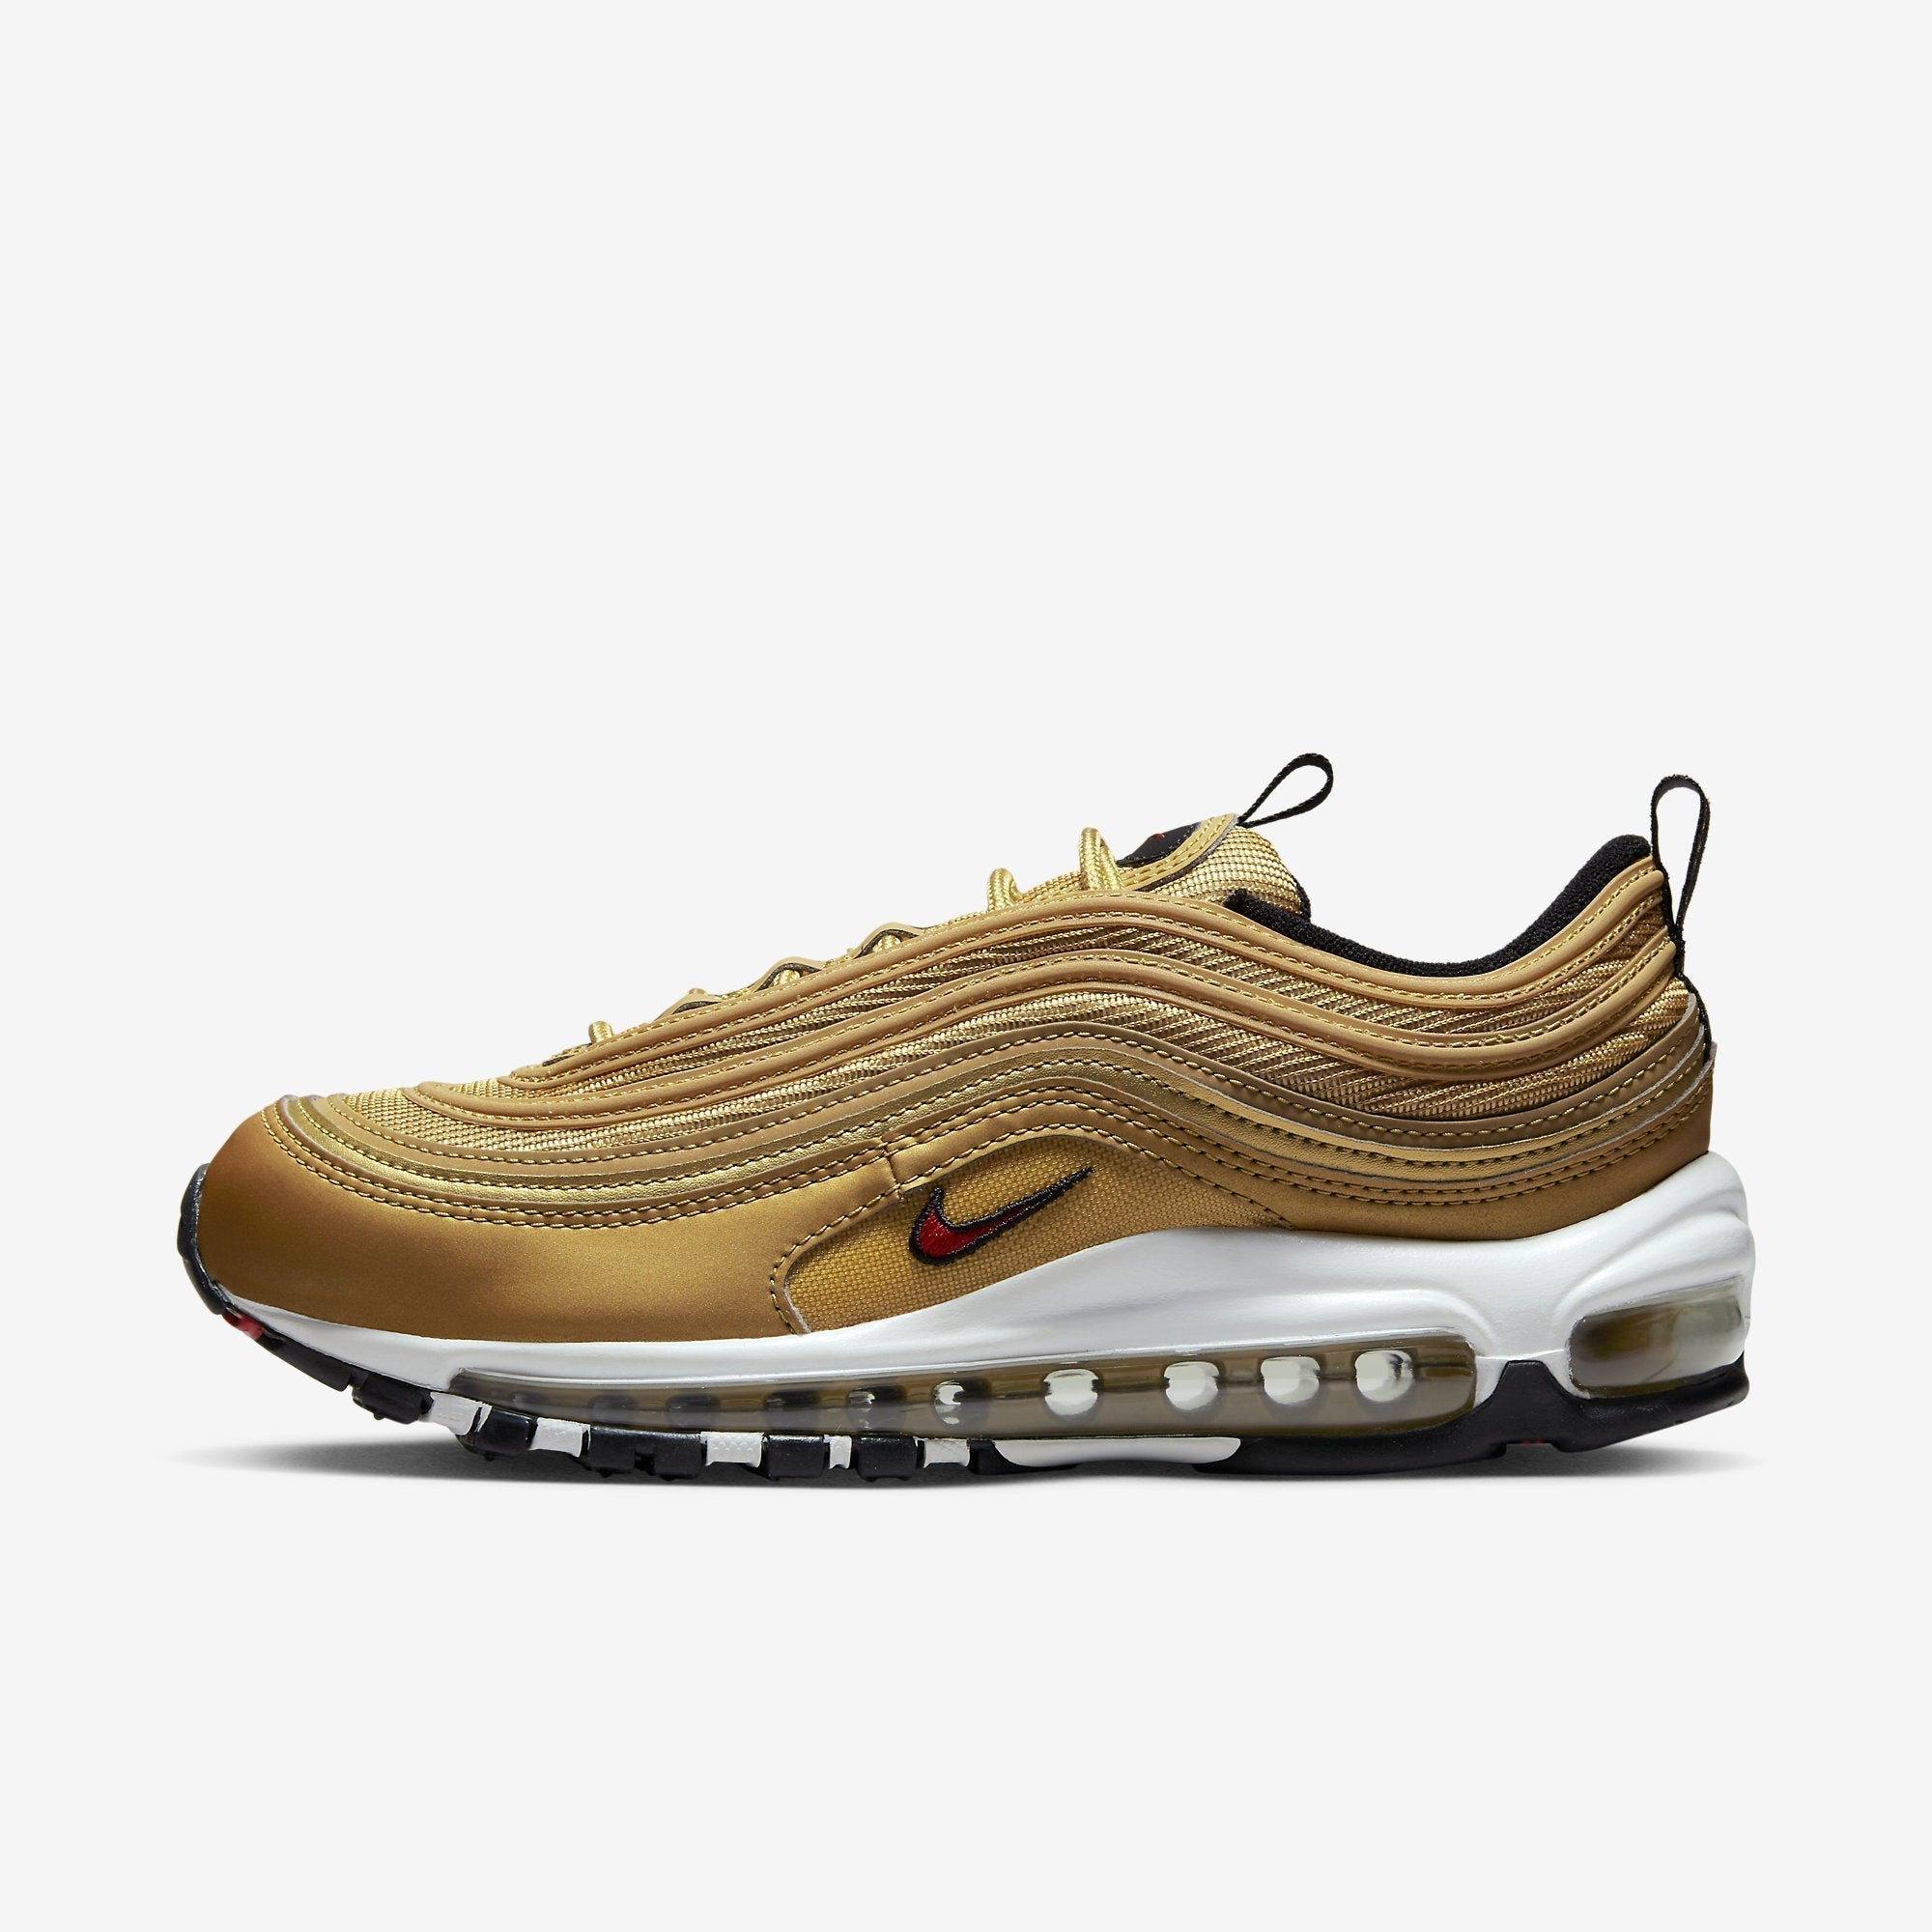 700 – Legrand Sneakers Sales Online - nike free 4.0 2015 sizing chart shoes - Nike Air Max 97 'Metallic Golden Bullet' 2023 DQ9131